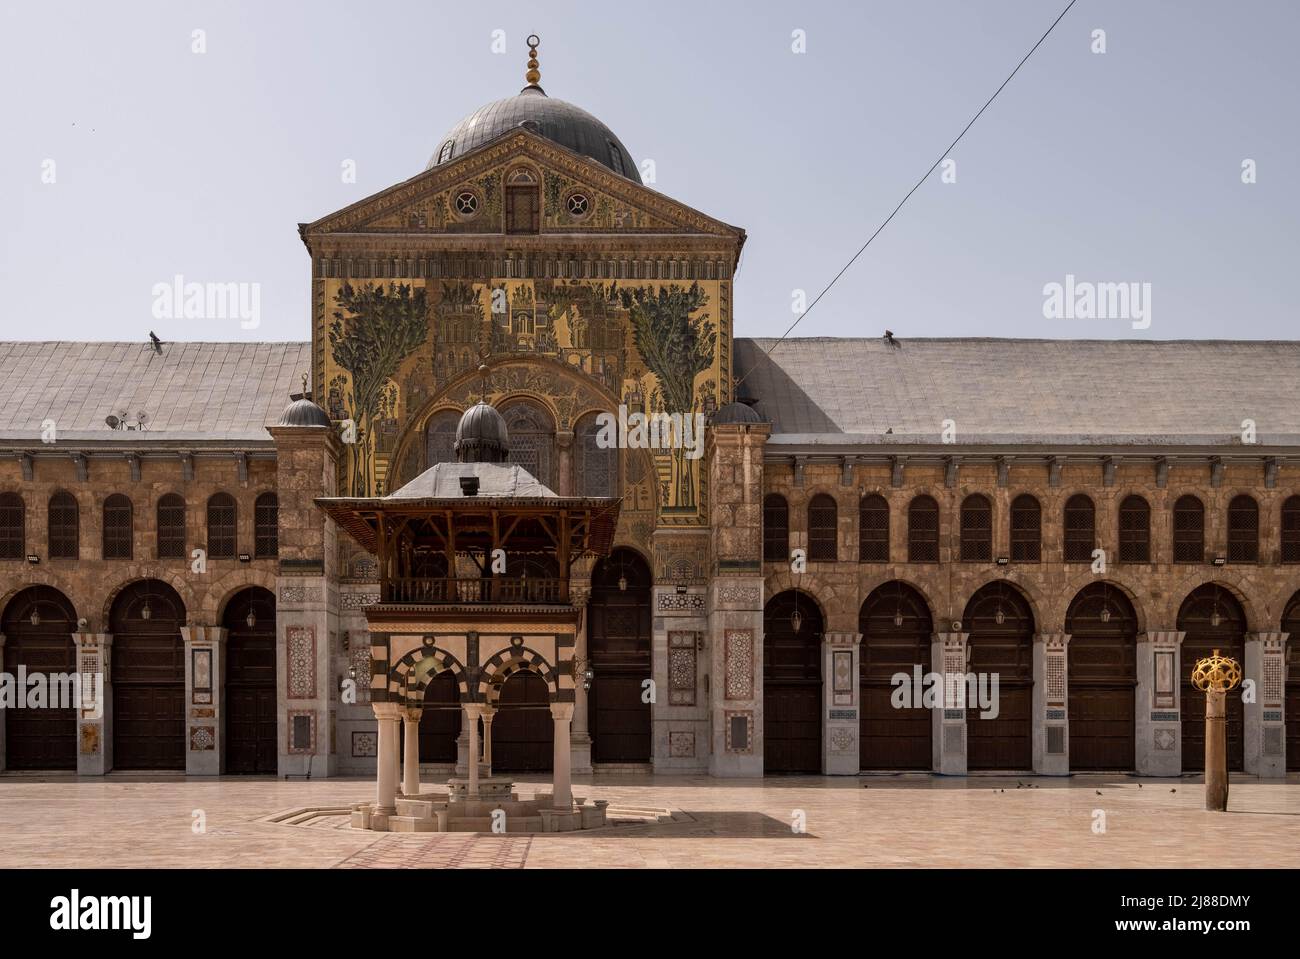 Damascus, Syria -May, 2022: The Umayyad Mosque, also known as the Great Mosque of Damascus Stock Photo